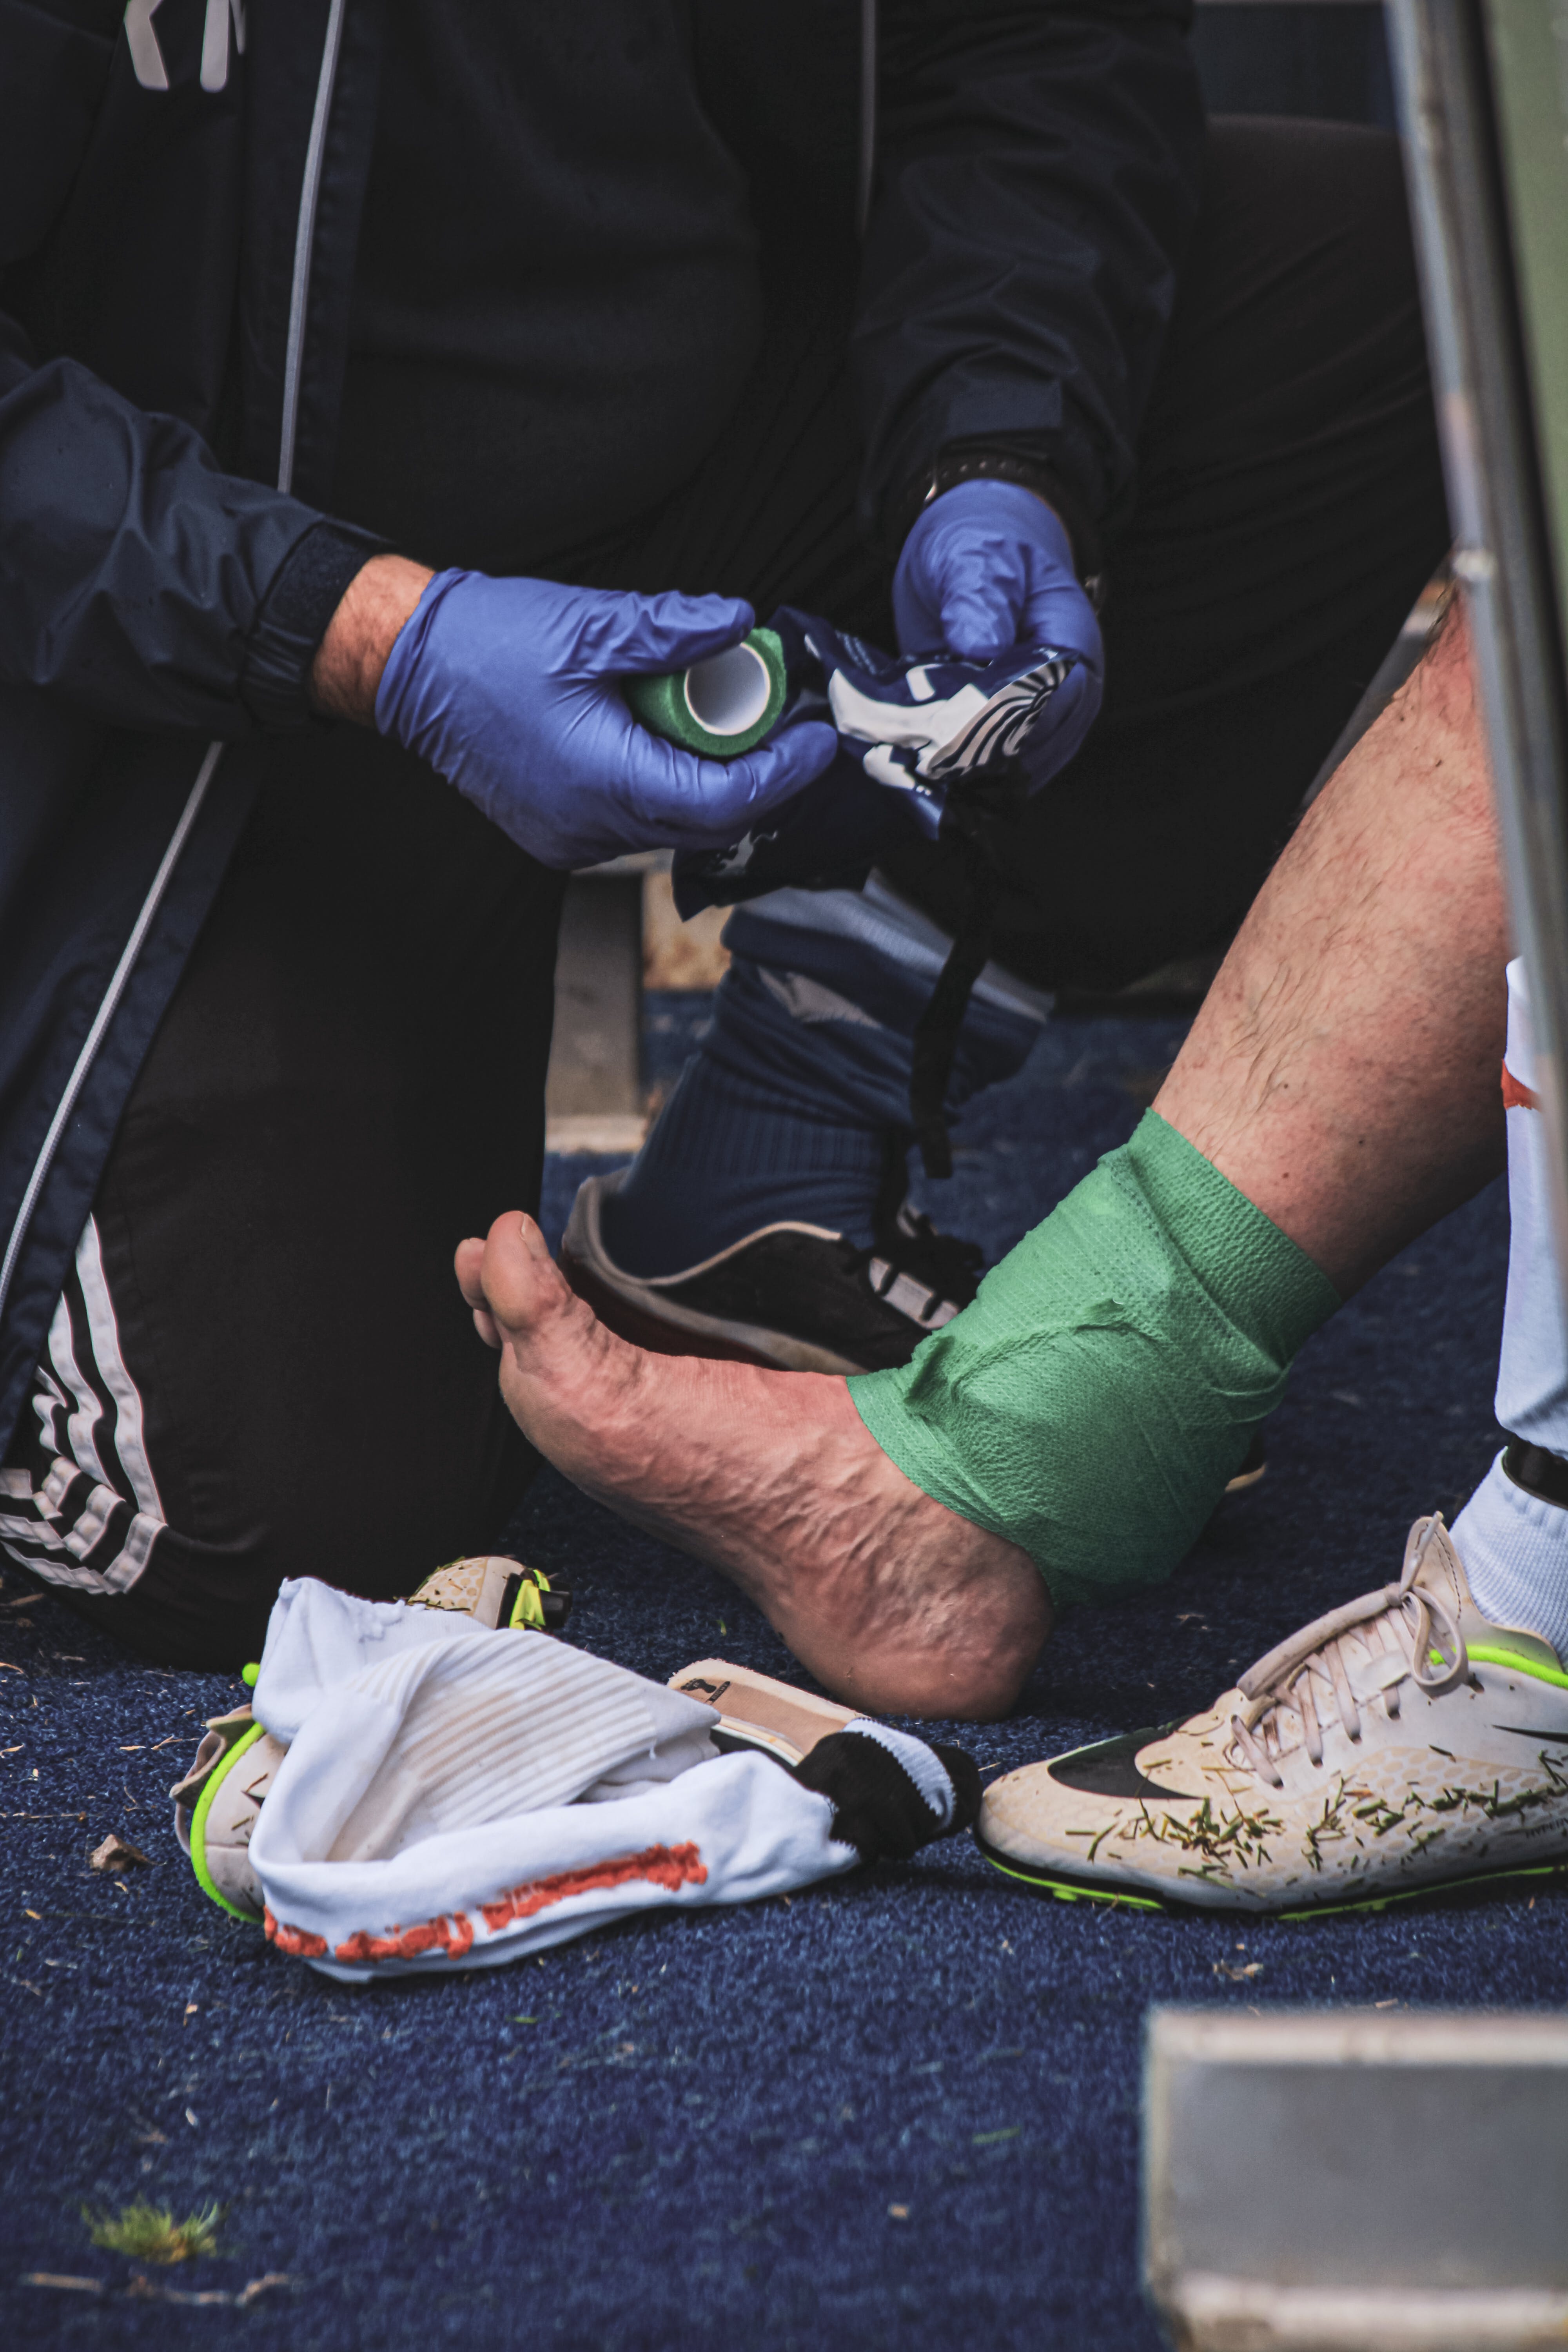 A photo of a person with an injury on his leg. | Source: Pexels